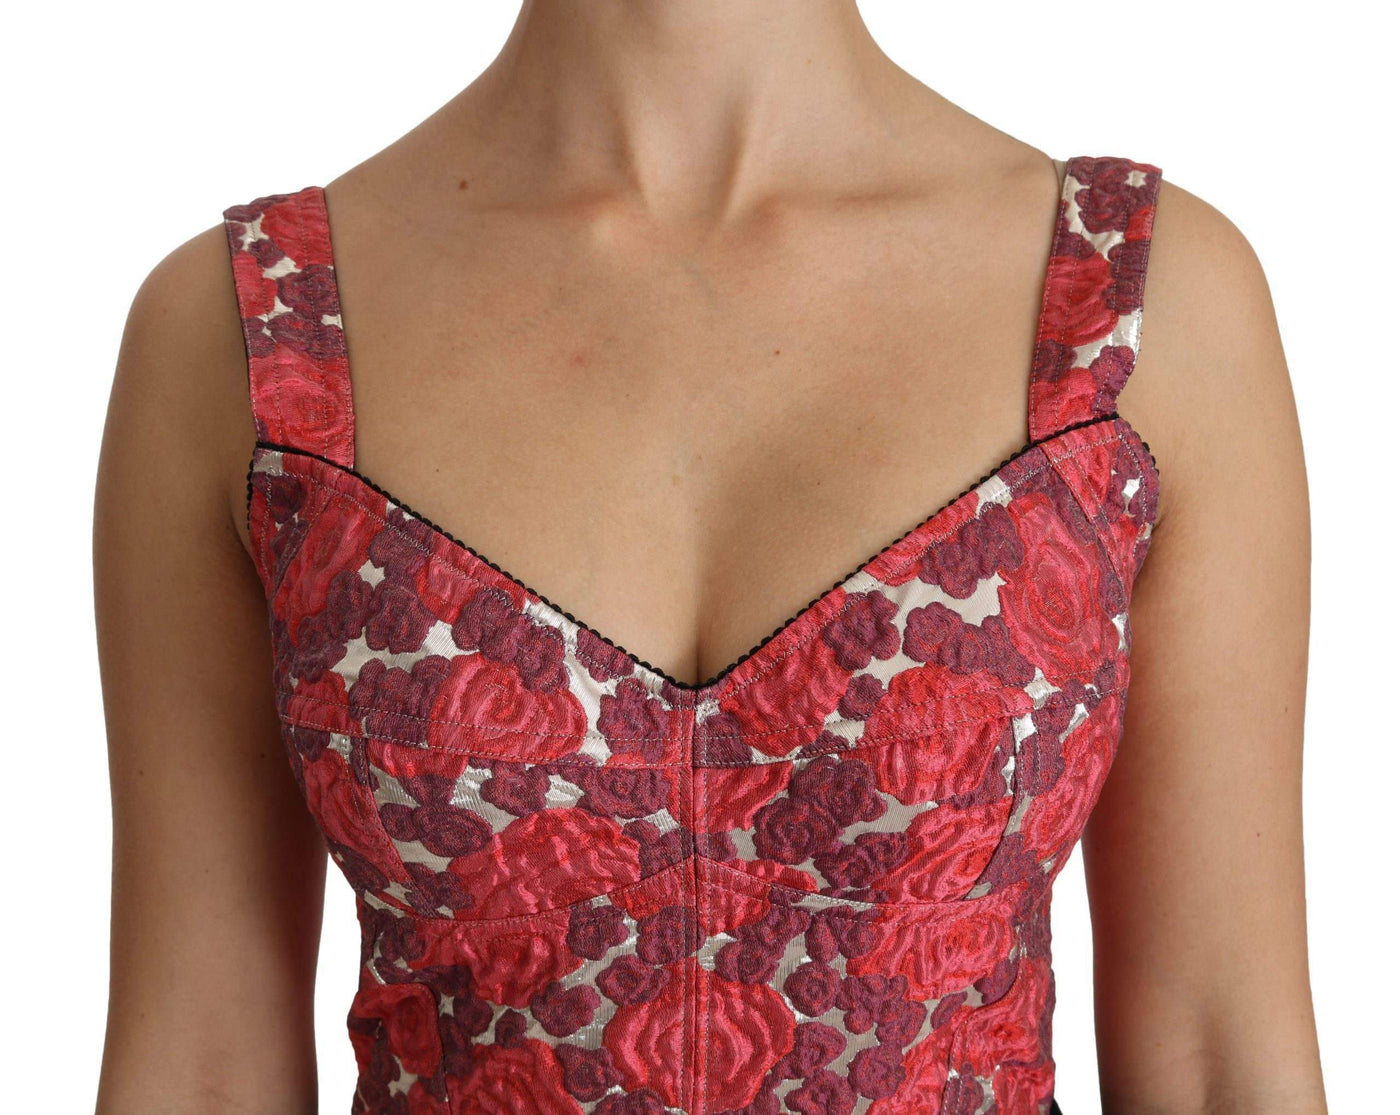 Dolce & Gabbana  Pink Floral Brocade Cropped Blouse Tank Top #women, Brand_Dolce & Gabbana, Catch, Dolce & Gabbana, feed-agegroup-adult, feed-color-pink, feed-gender-female, feed-size-IT36 | XS, feed-size-IT38|XS, feed-size-IT40|S, feed-size-IT42|M, feed-size-IT46|XL, feed-size-IT48|XXL, Gender_Women, IT36 | XS, IT38|XS, IT40|S, IT42|M, IT44|L, IT46|XL, IT48|XXL, Kogan, Pink, Tops & T-Shirts - Women - Clothing, Women - New Arrivals at SEYMAYKA